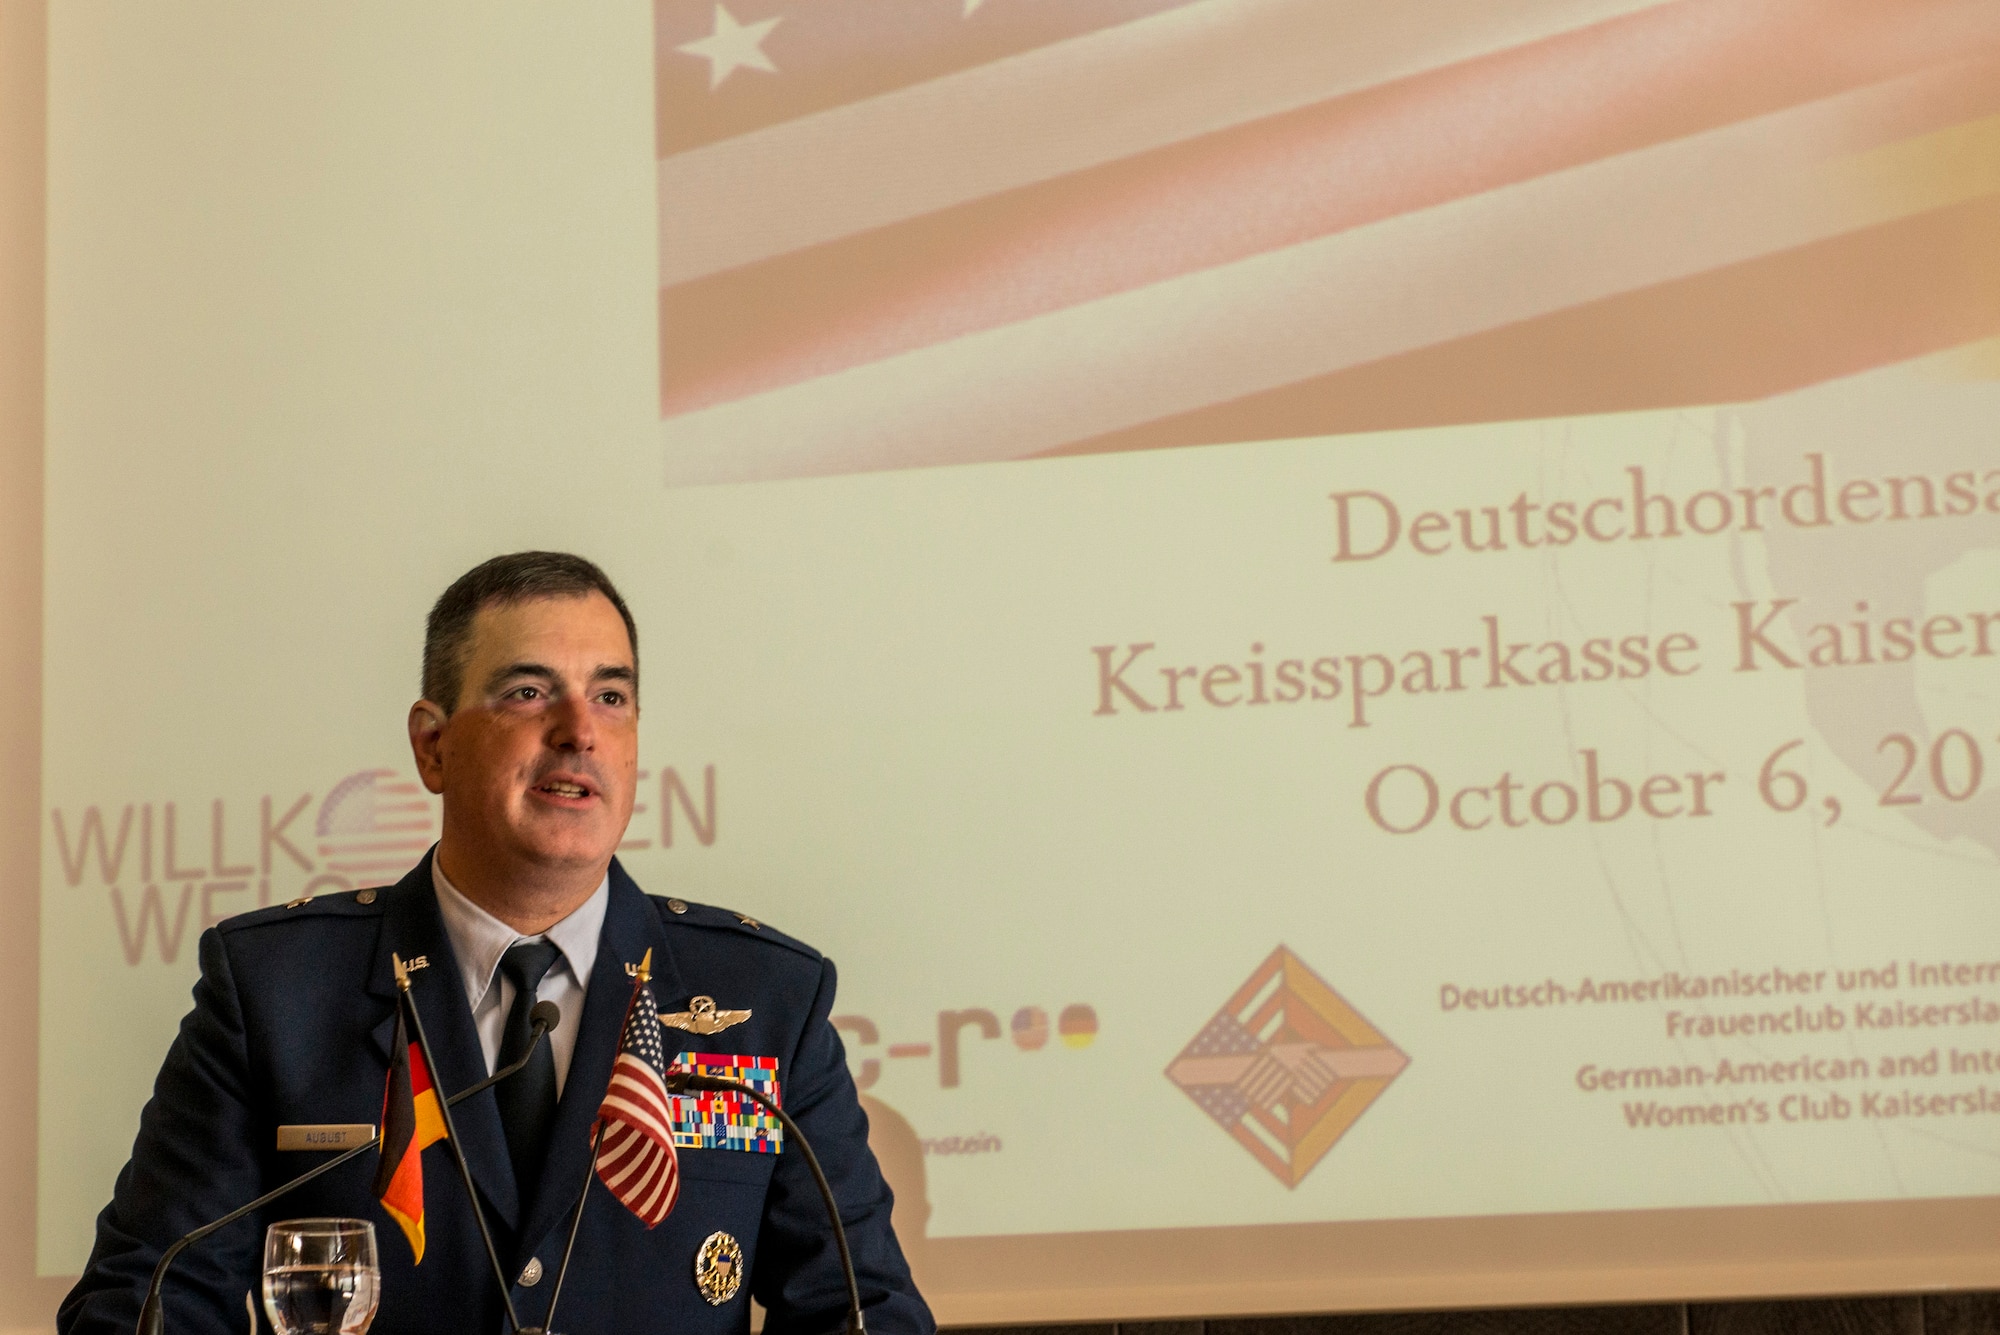 U.S. Air Force Brig Gen. Mark R. August, 86th Airlift Wing commander, delivers remarks during the 35th annual German-American Day celebration in Kaiserslautern, Germany, Oct. 6, 2018. In 1983, former U.S. President Ronald Reagan established German-American Day to honor the German families who immigrated to the U.S. and established Germantown, near Philadelphia, Pa., in 1683. (U.S. Air Force photo by Staff Sgt. Jonathan Bass)